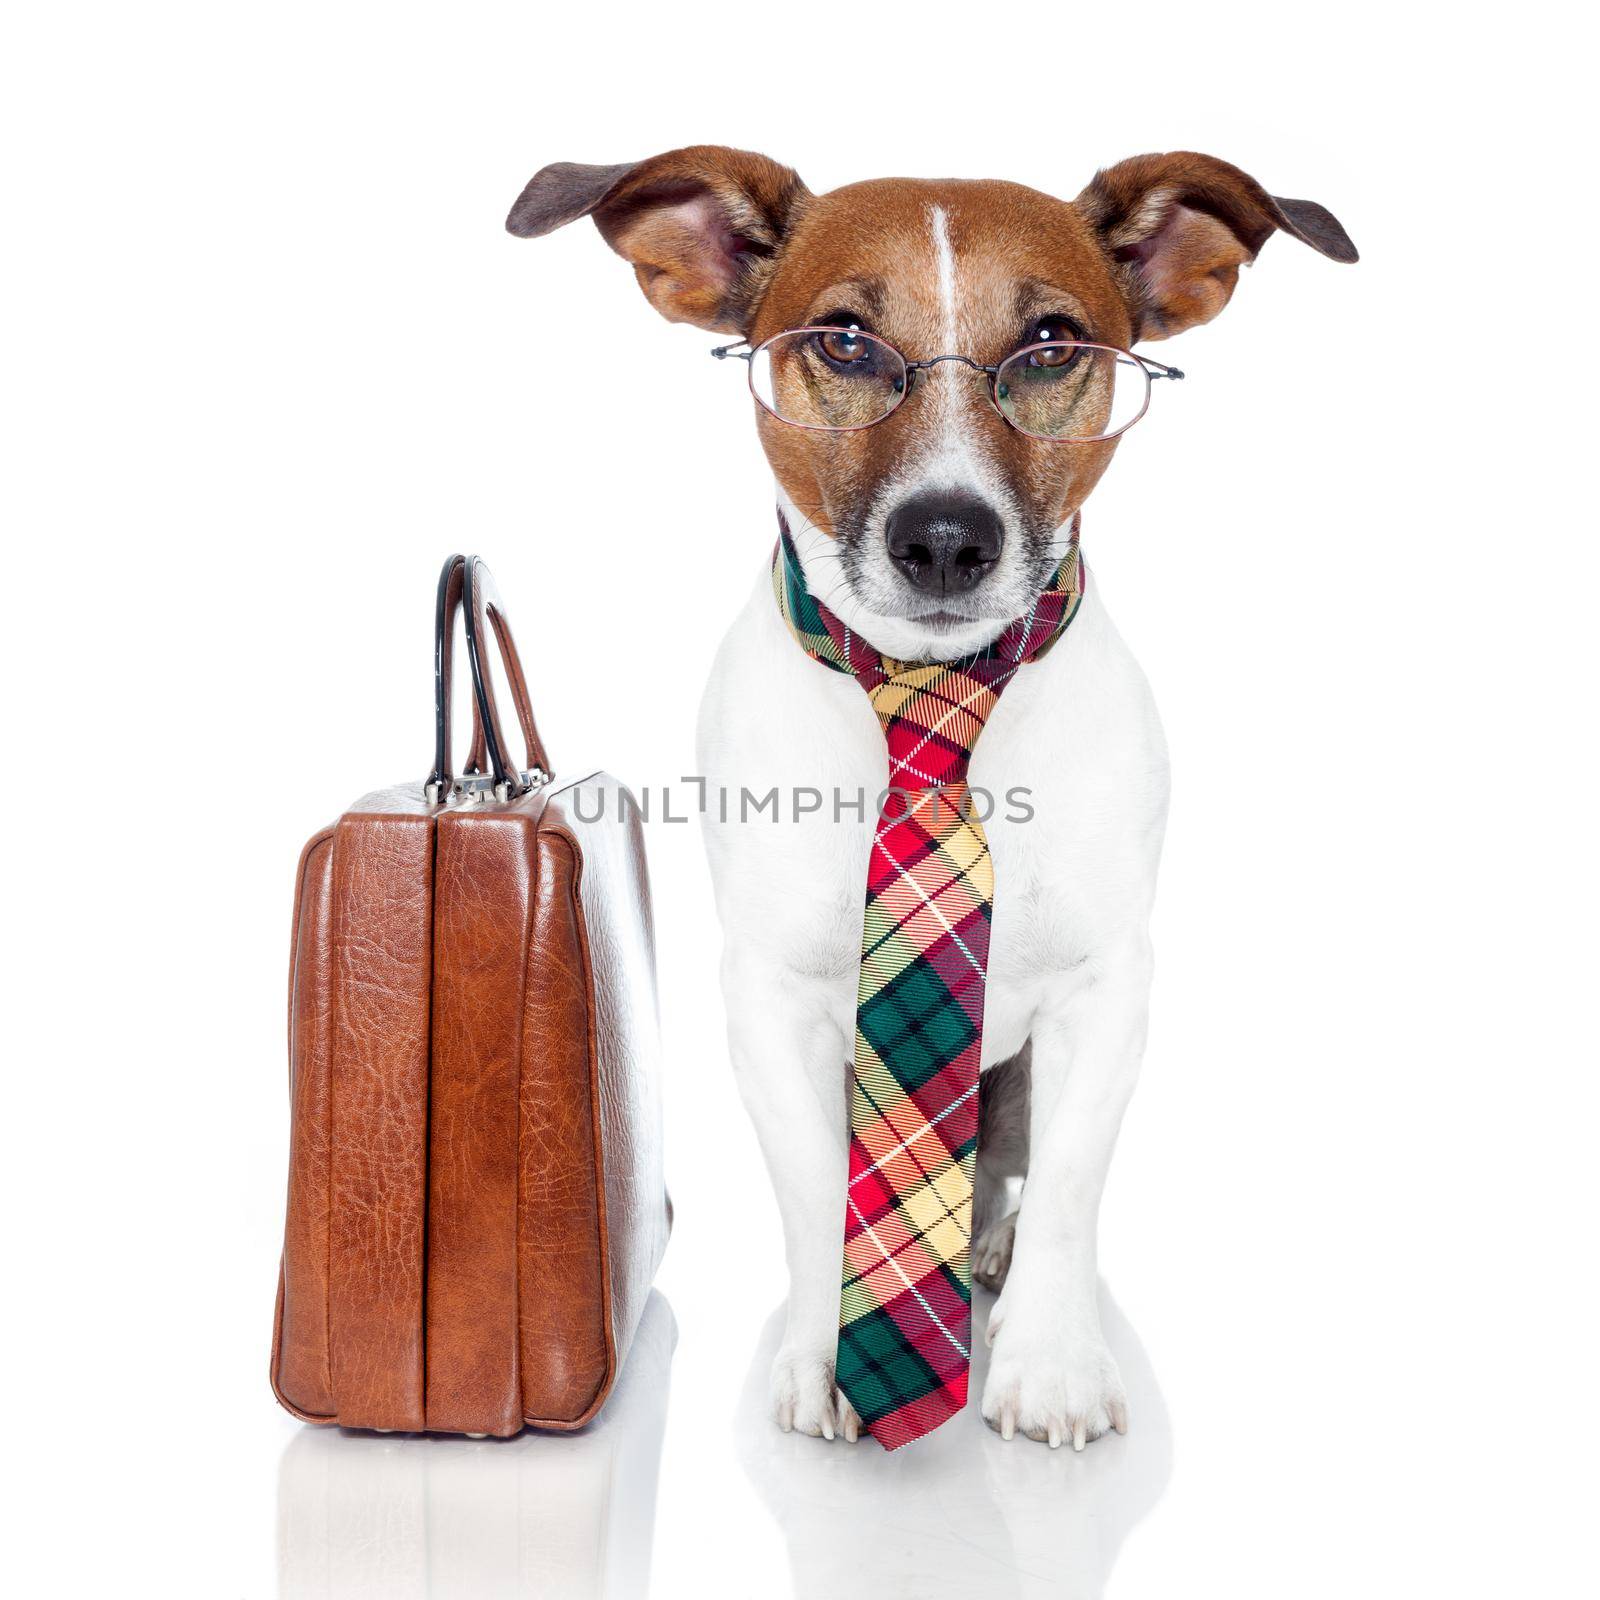 business dog with a leather bag by Brosch